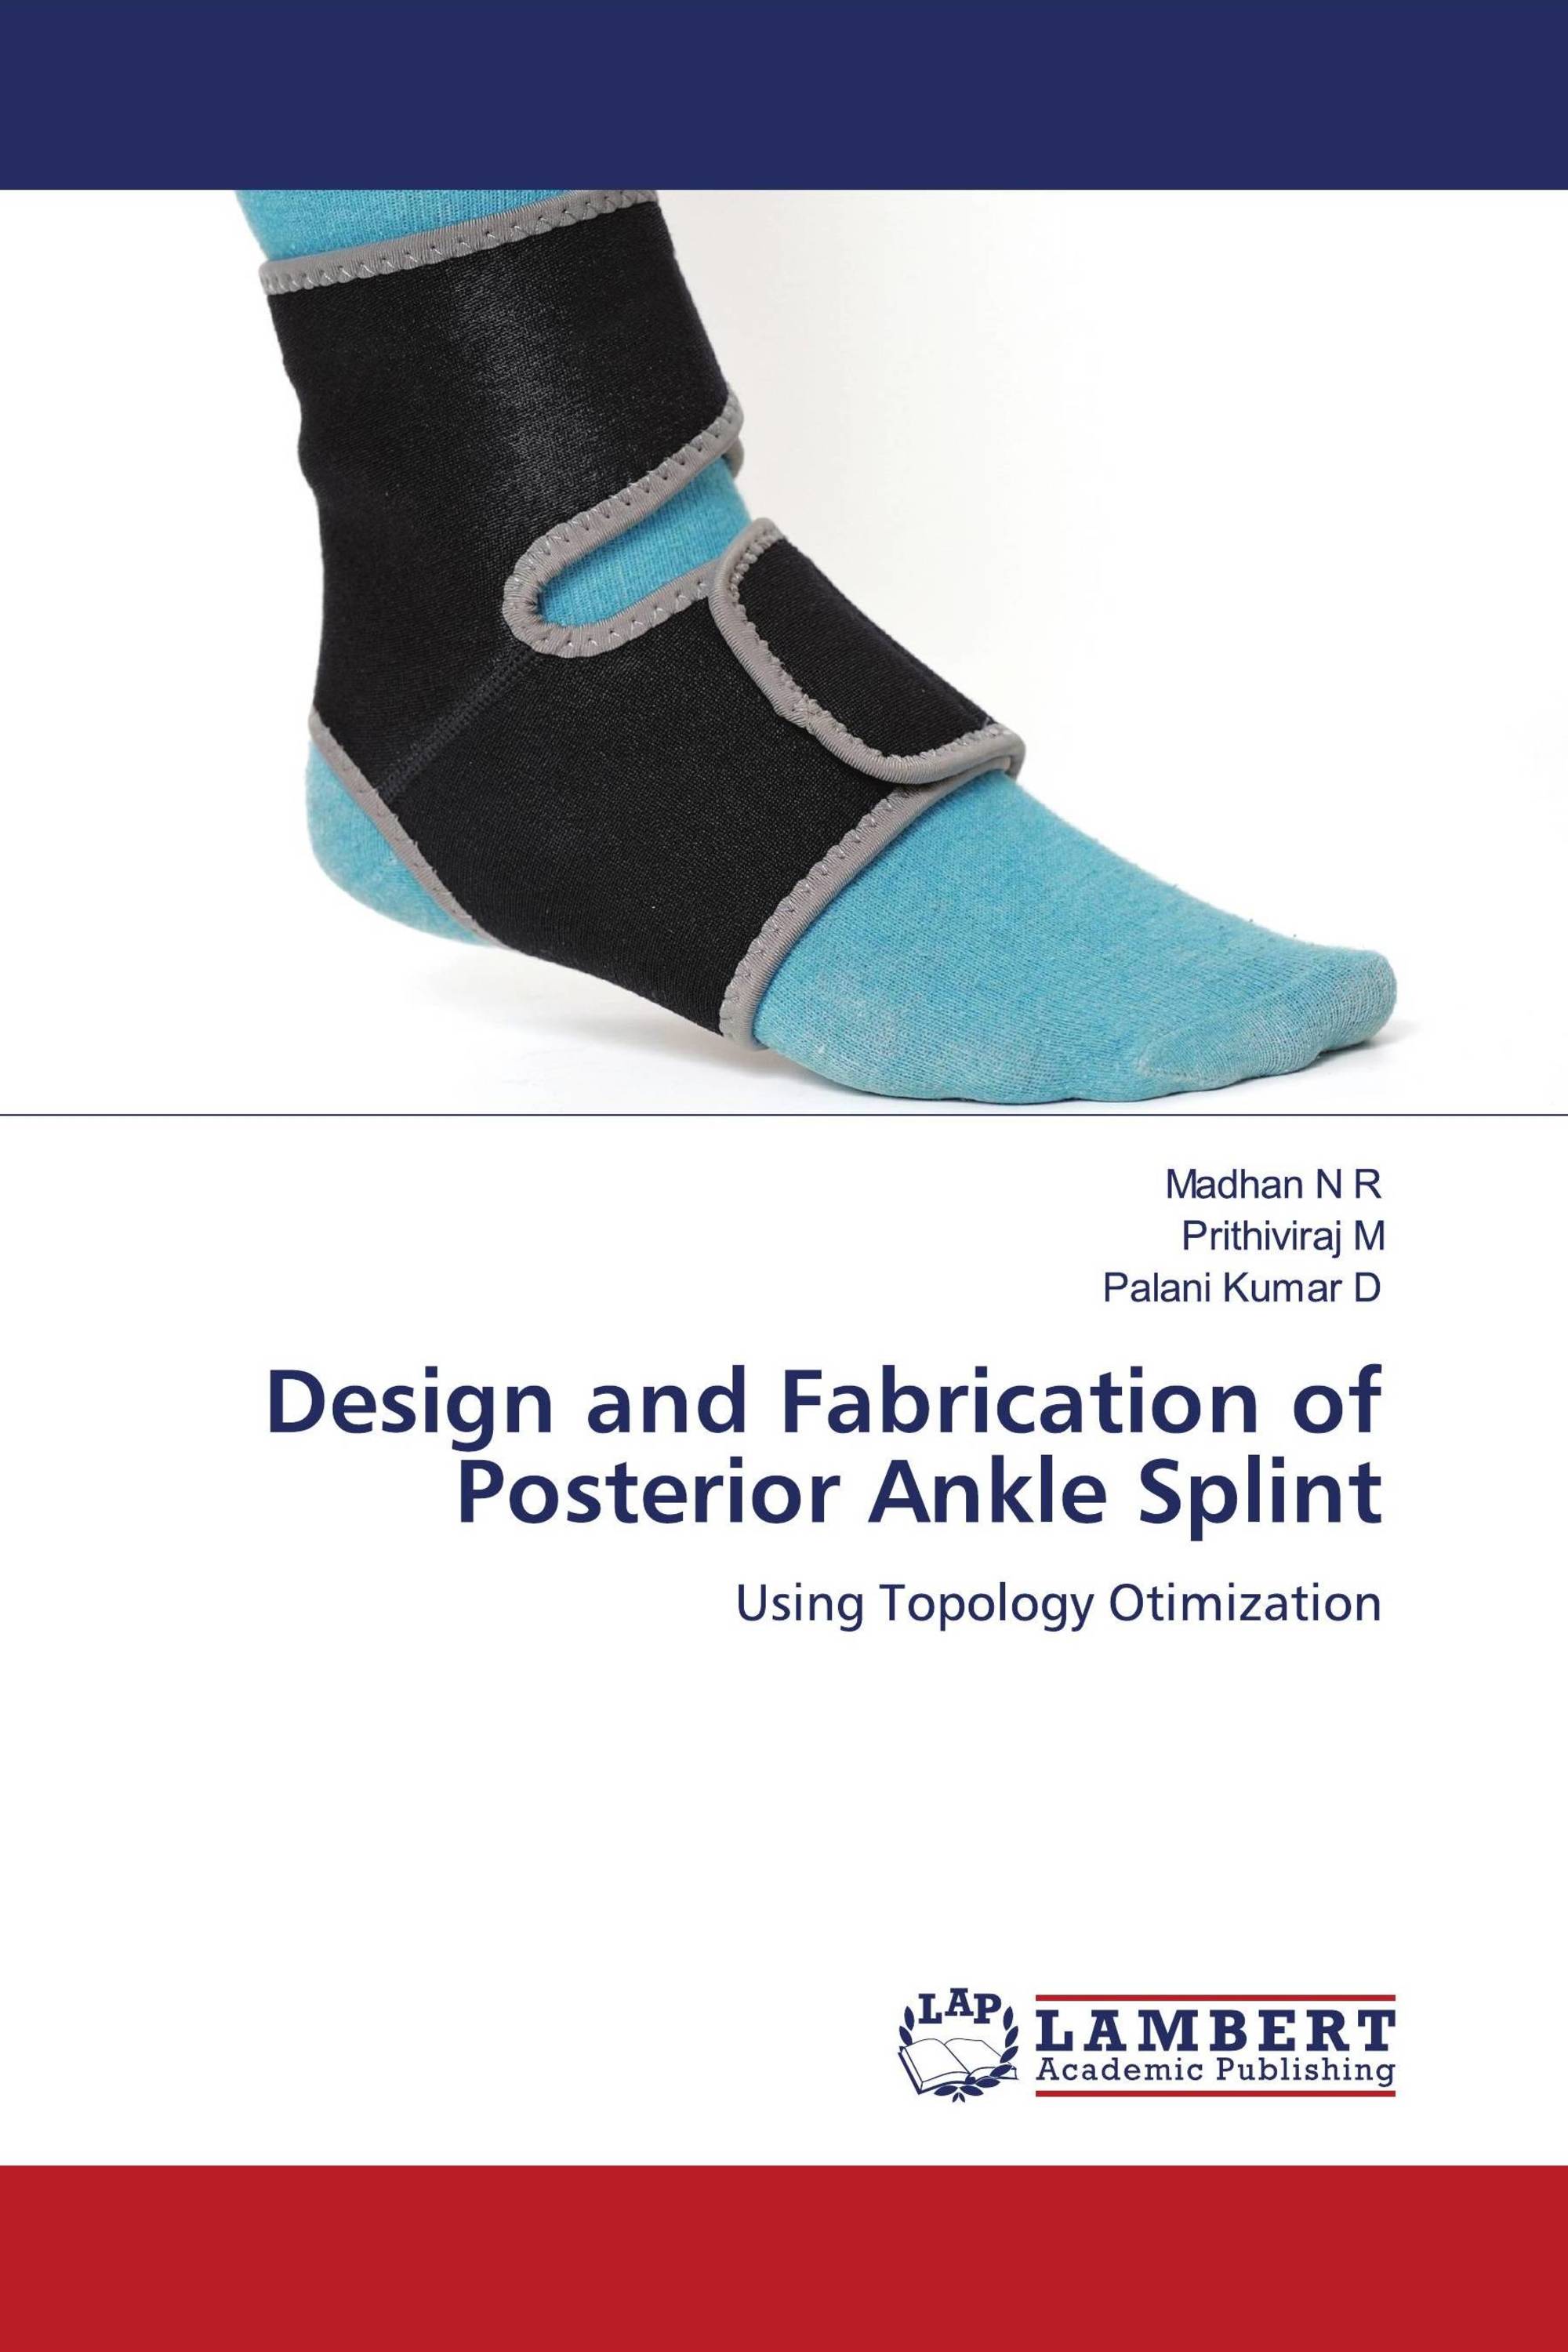 Design and Fabrication of Posterior Ankle Splint